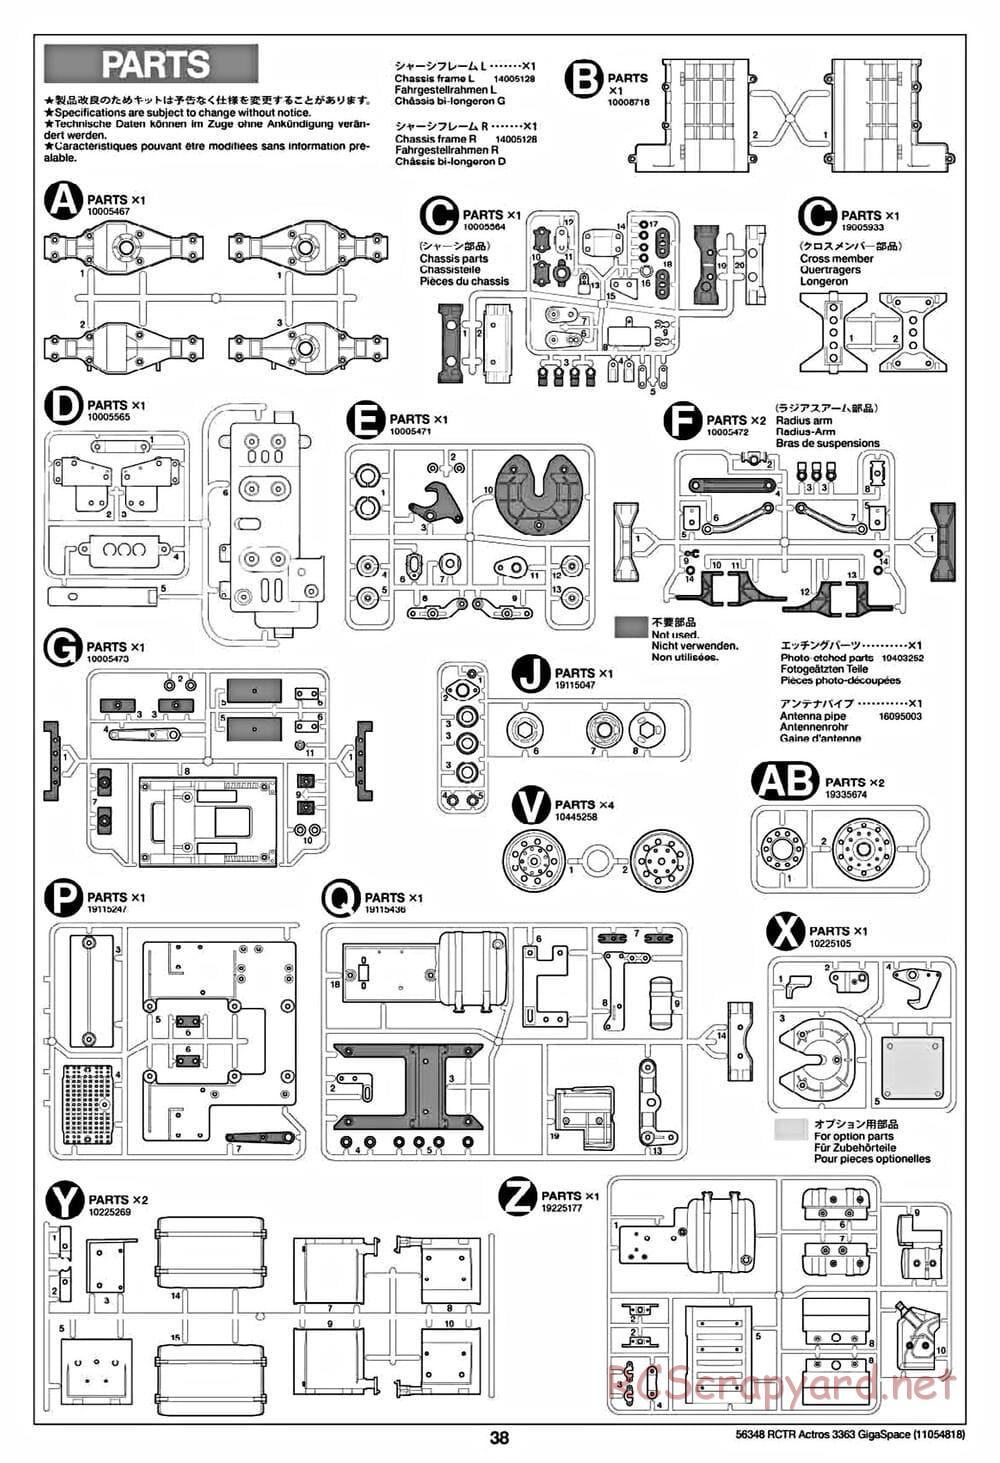 Tamiya - Mercedes-Benz Actros 3363 6x4 GigaSpace Tractor Truck Chassis - Manual - Page 38